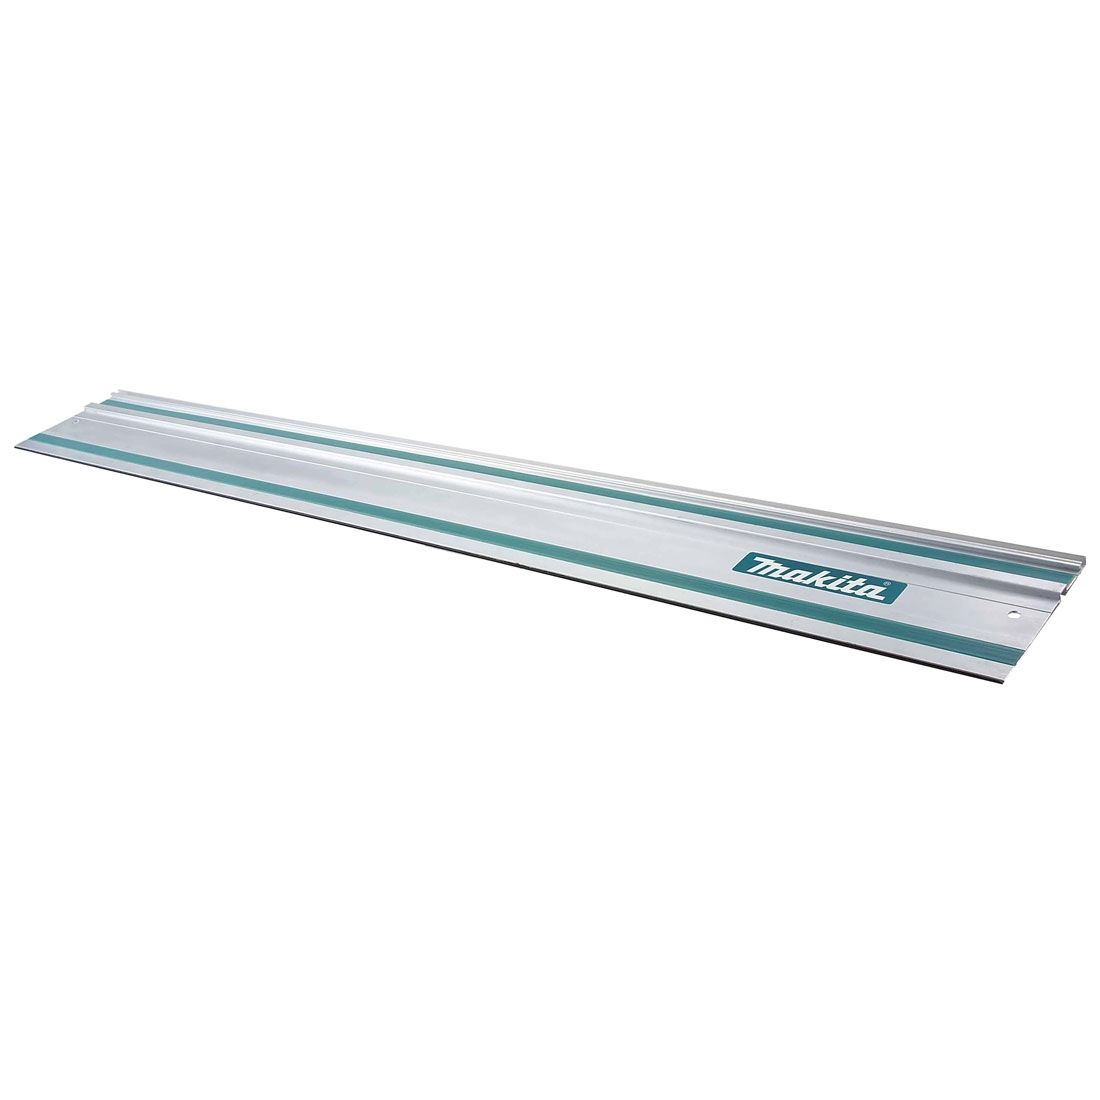 Makita 199140-0 39 inch Plunge Saw Guide Rail for sale online